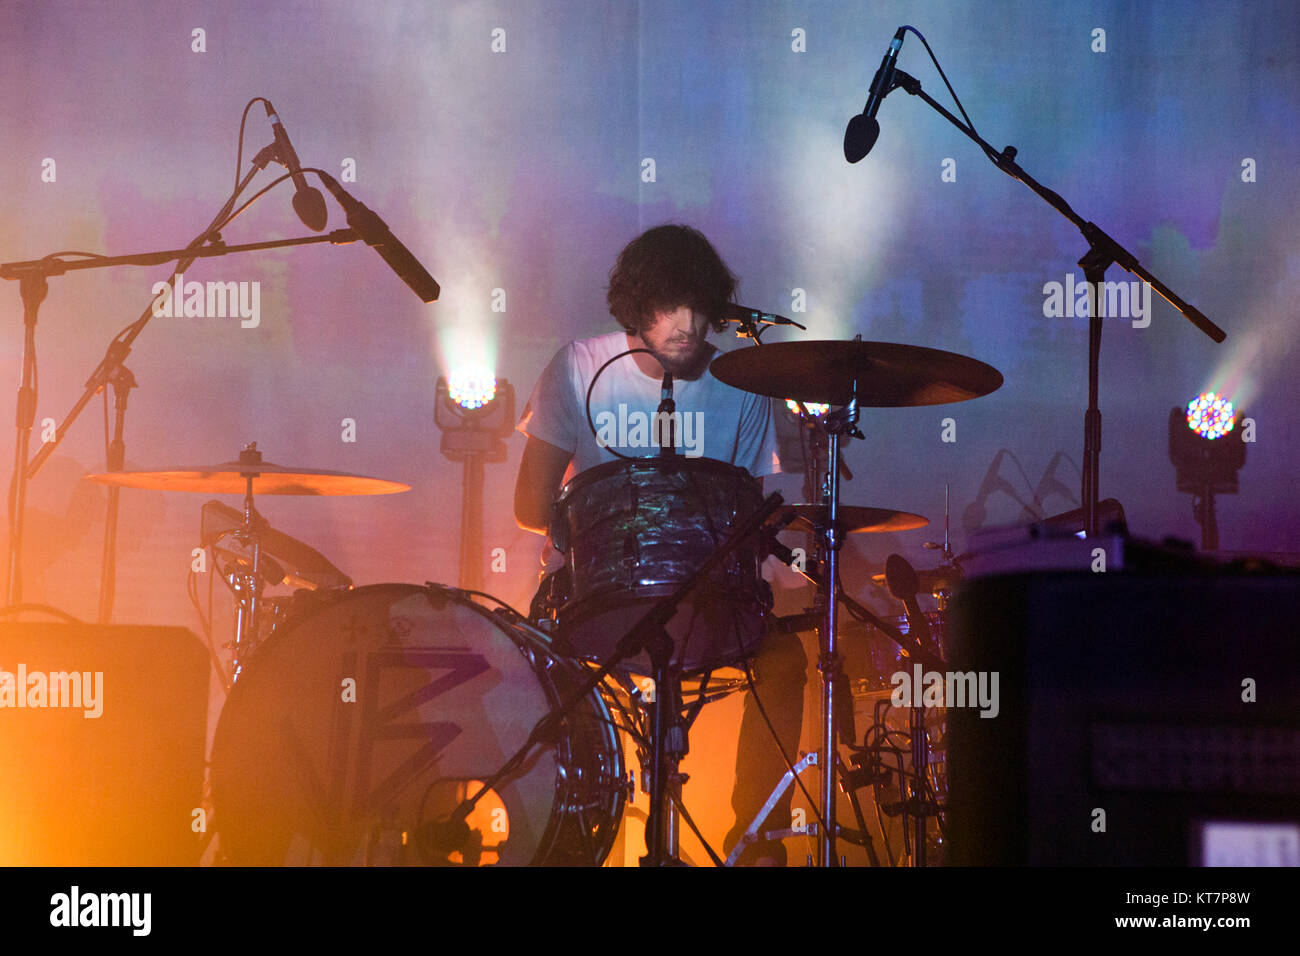 The Australian musical project Tame Impala performs a live concert at Sentrum Scene in Oslo. Here drummer Julien 'Frenchie' Barbagallo is seen live on stage. Norway, 04/02 2016. Stock Photo